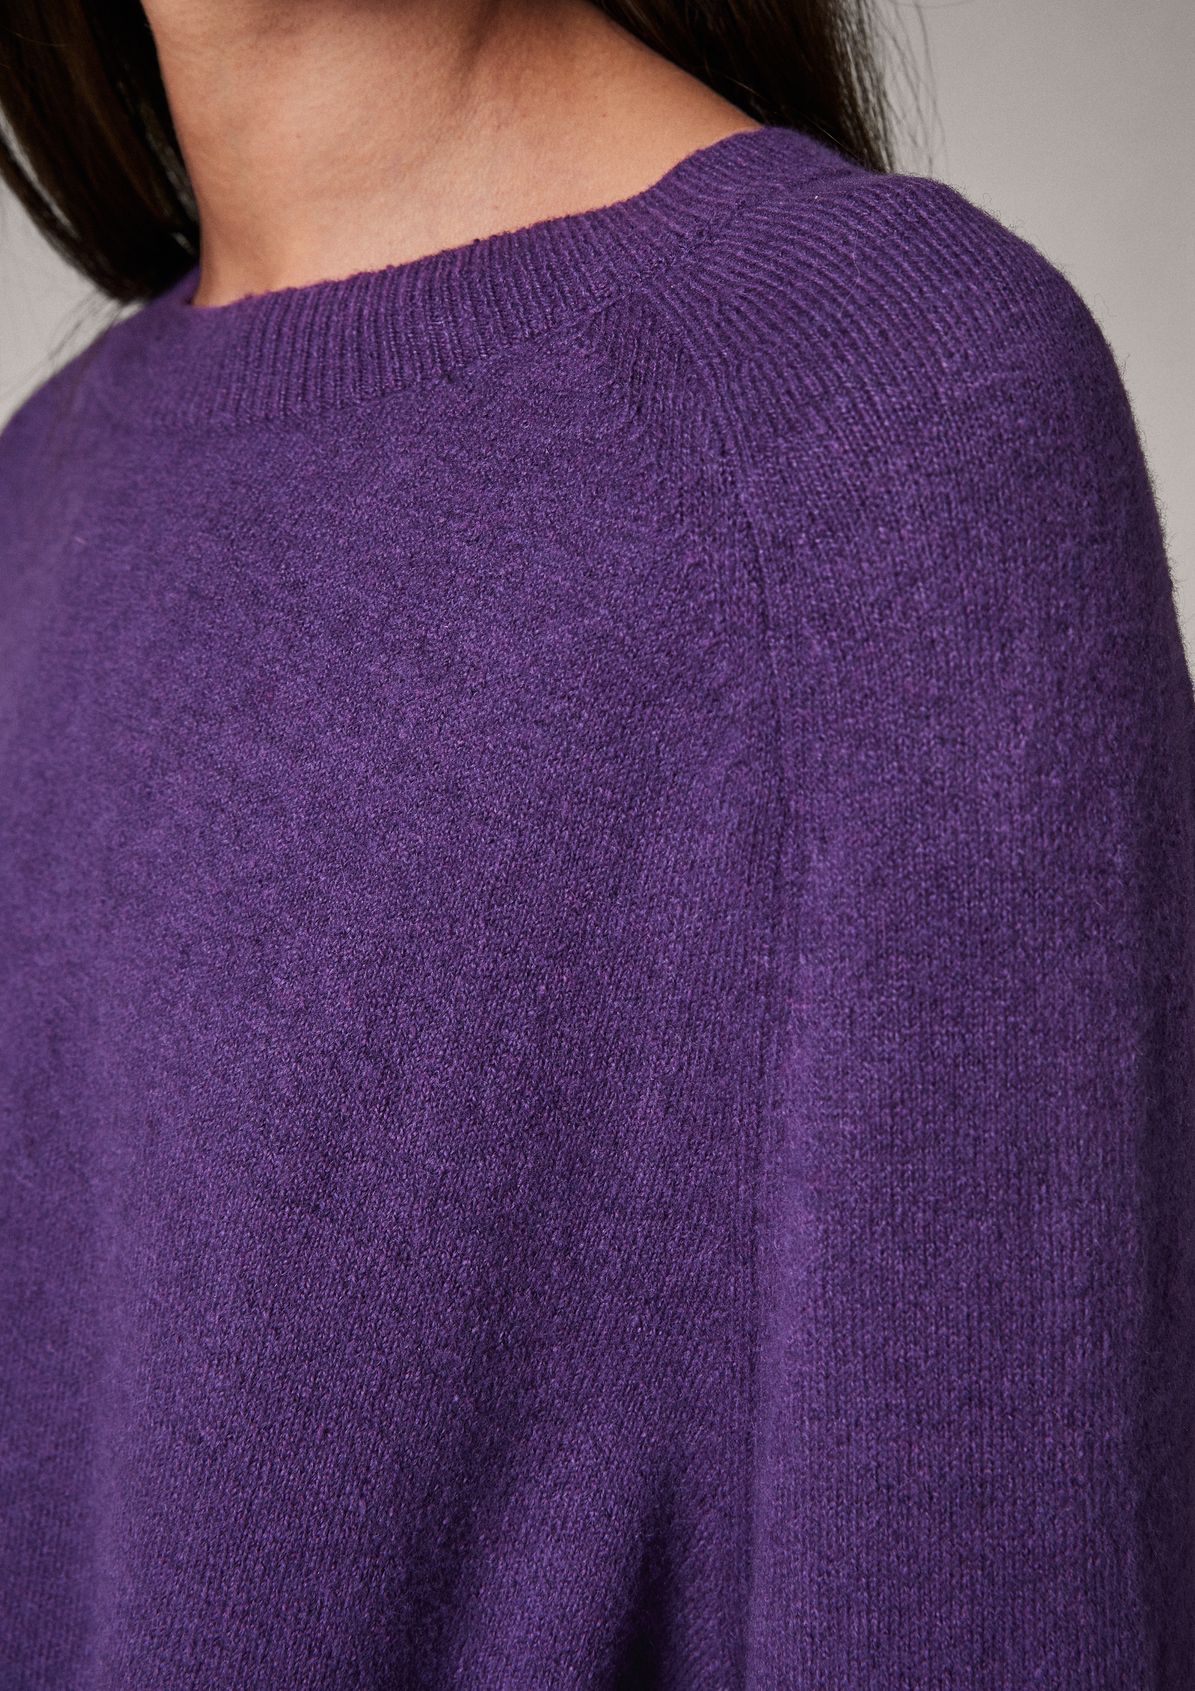 Soft knit jumper from comma